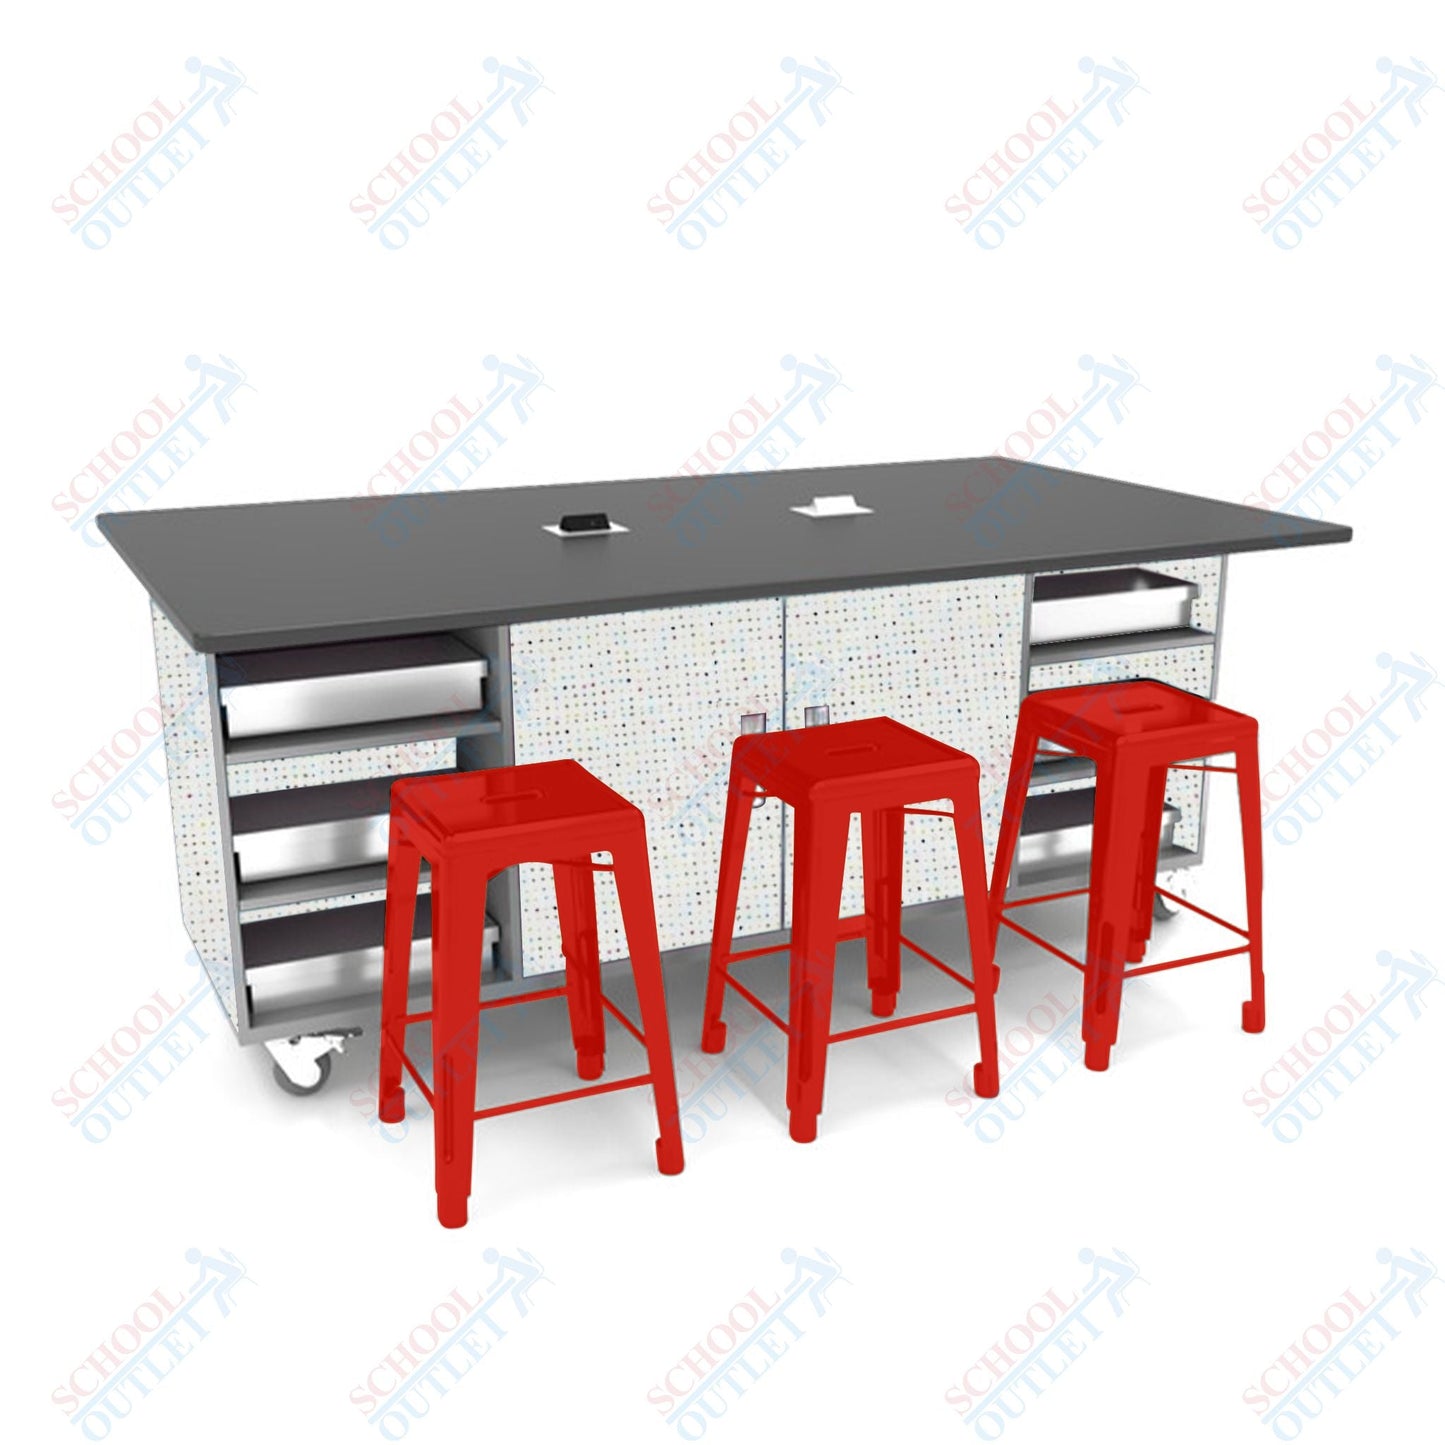 CEF ED Double Table 36"H Tough Top, Laminate Base with 6 Stools, Storage bins, and Electrical Outlets Included. - SchoolOutlet